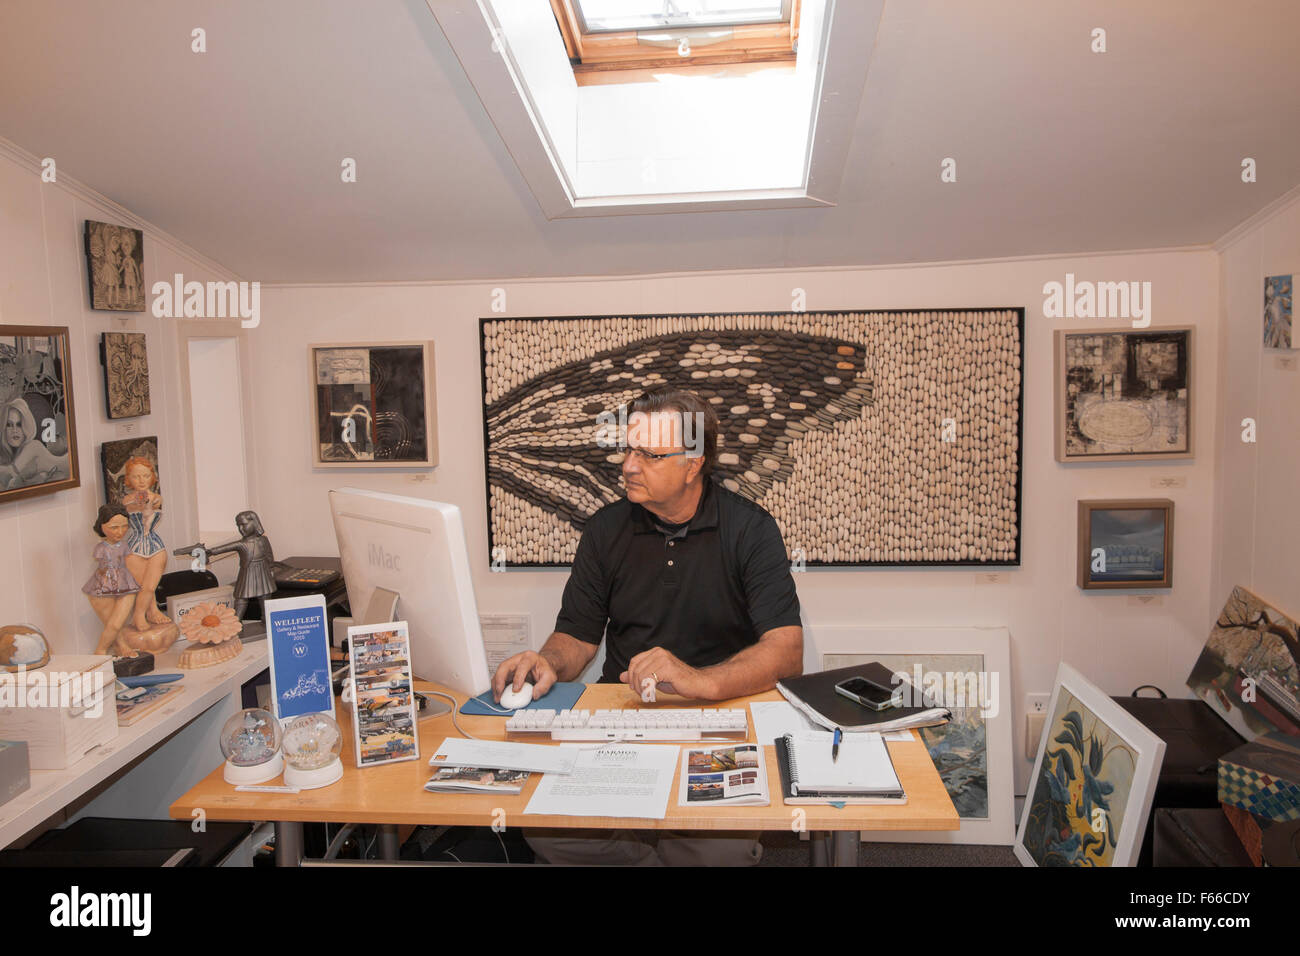 Art gallery owner/artist sitting at his desk working on computer. Stock Photo